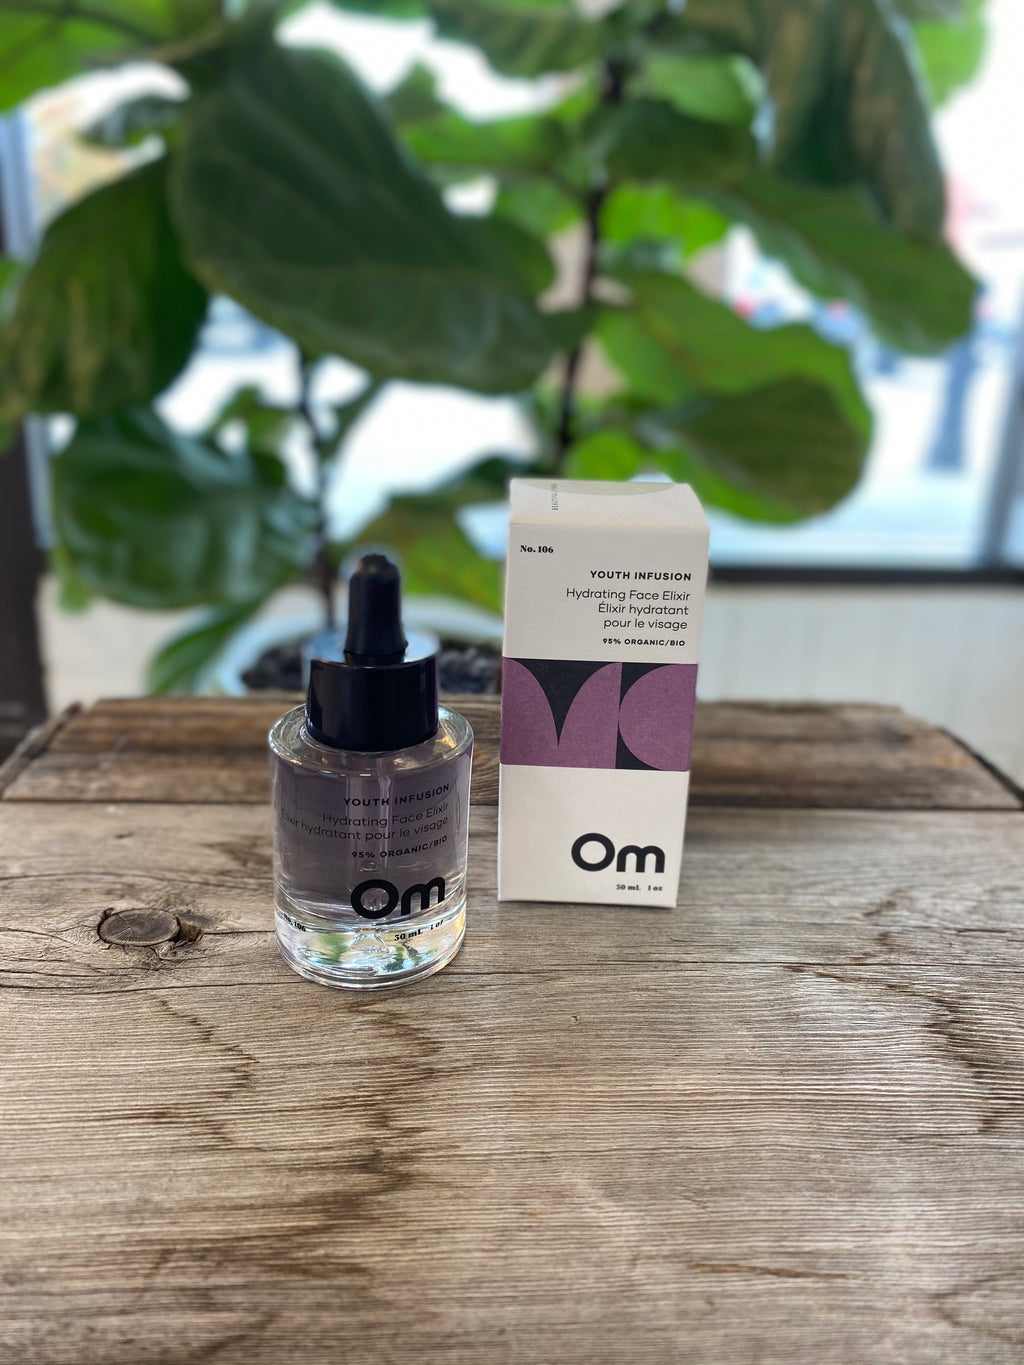 Om Organics- Youth Infusion Age Defying Face Elixir